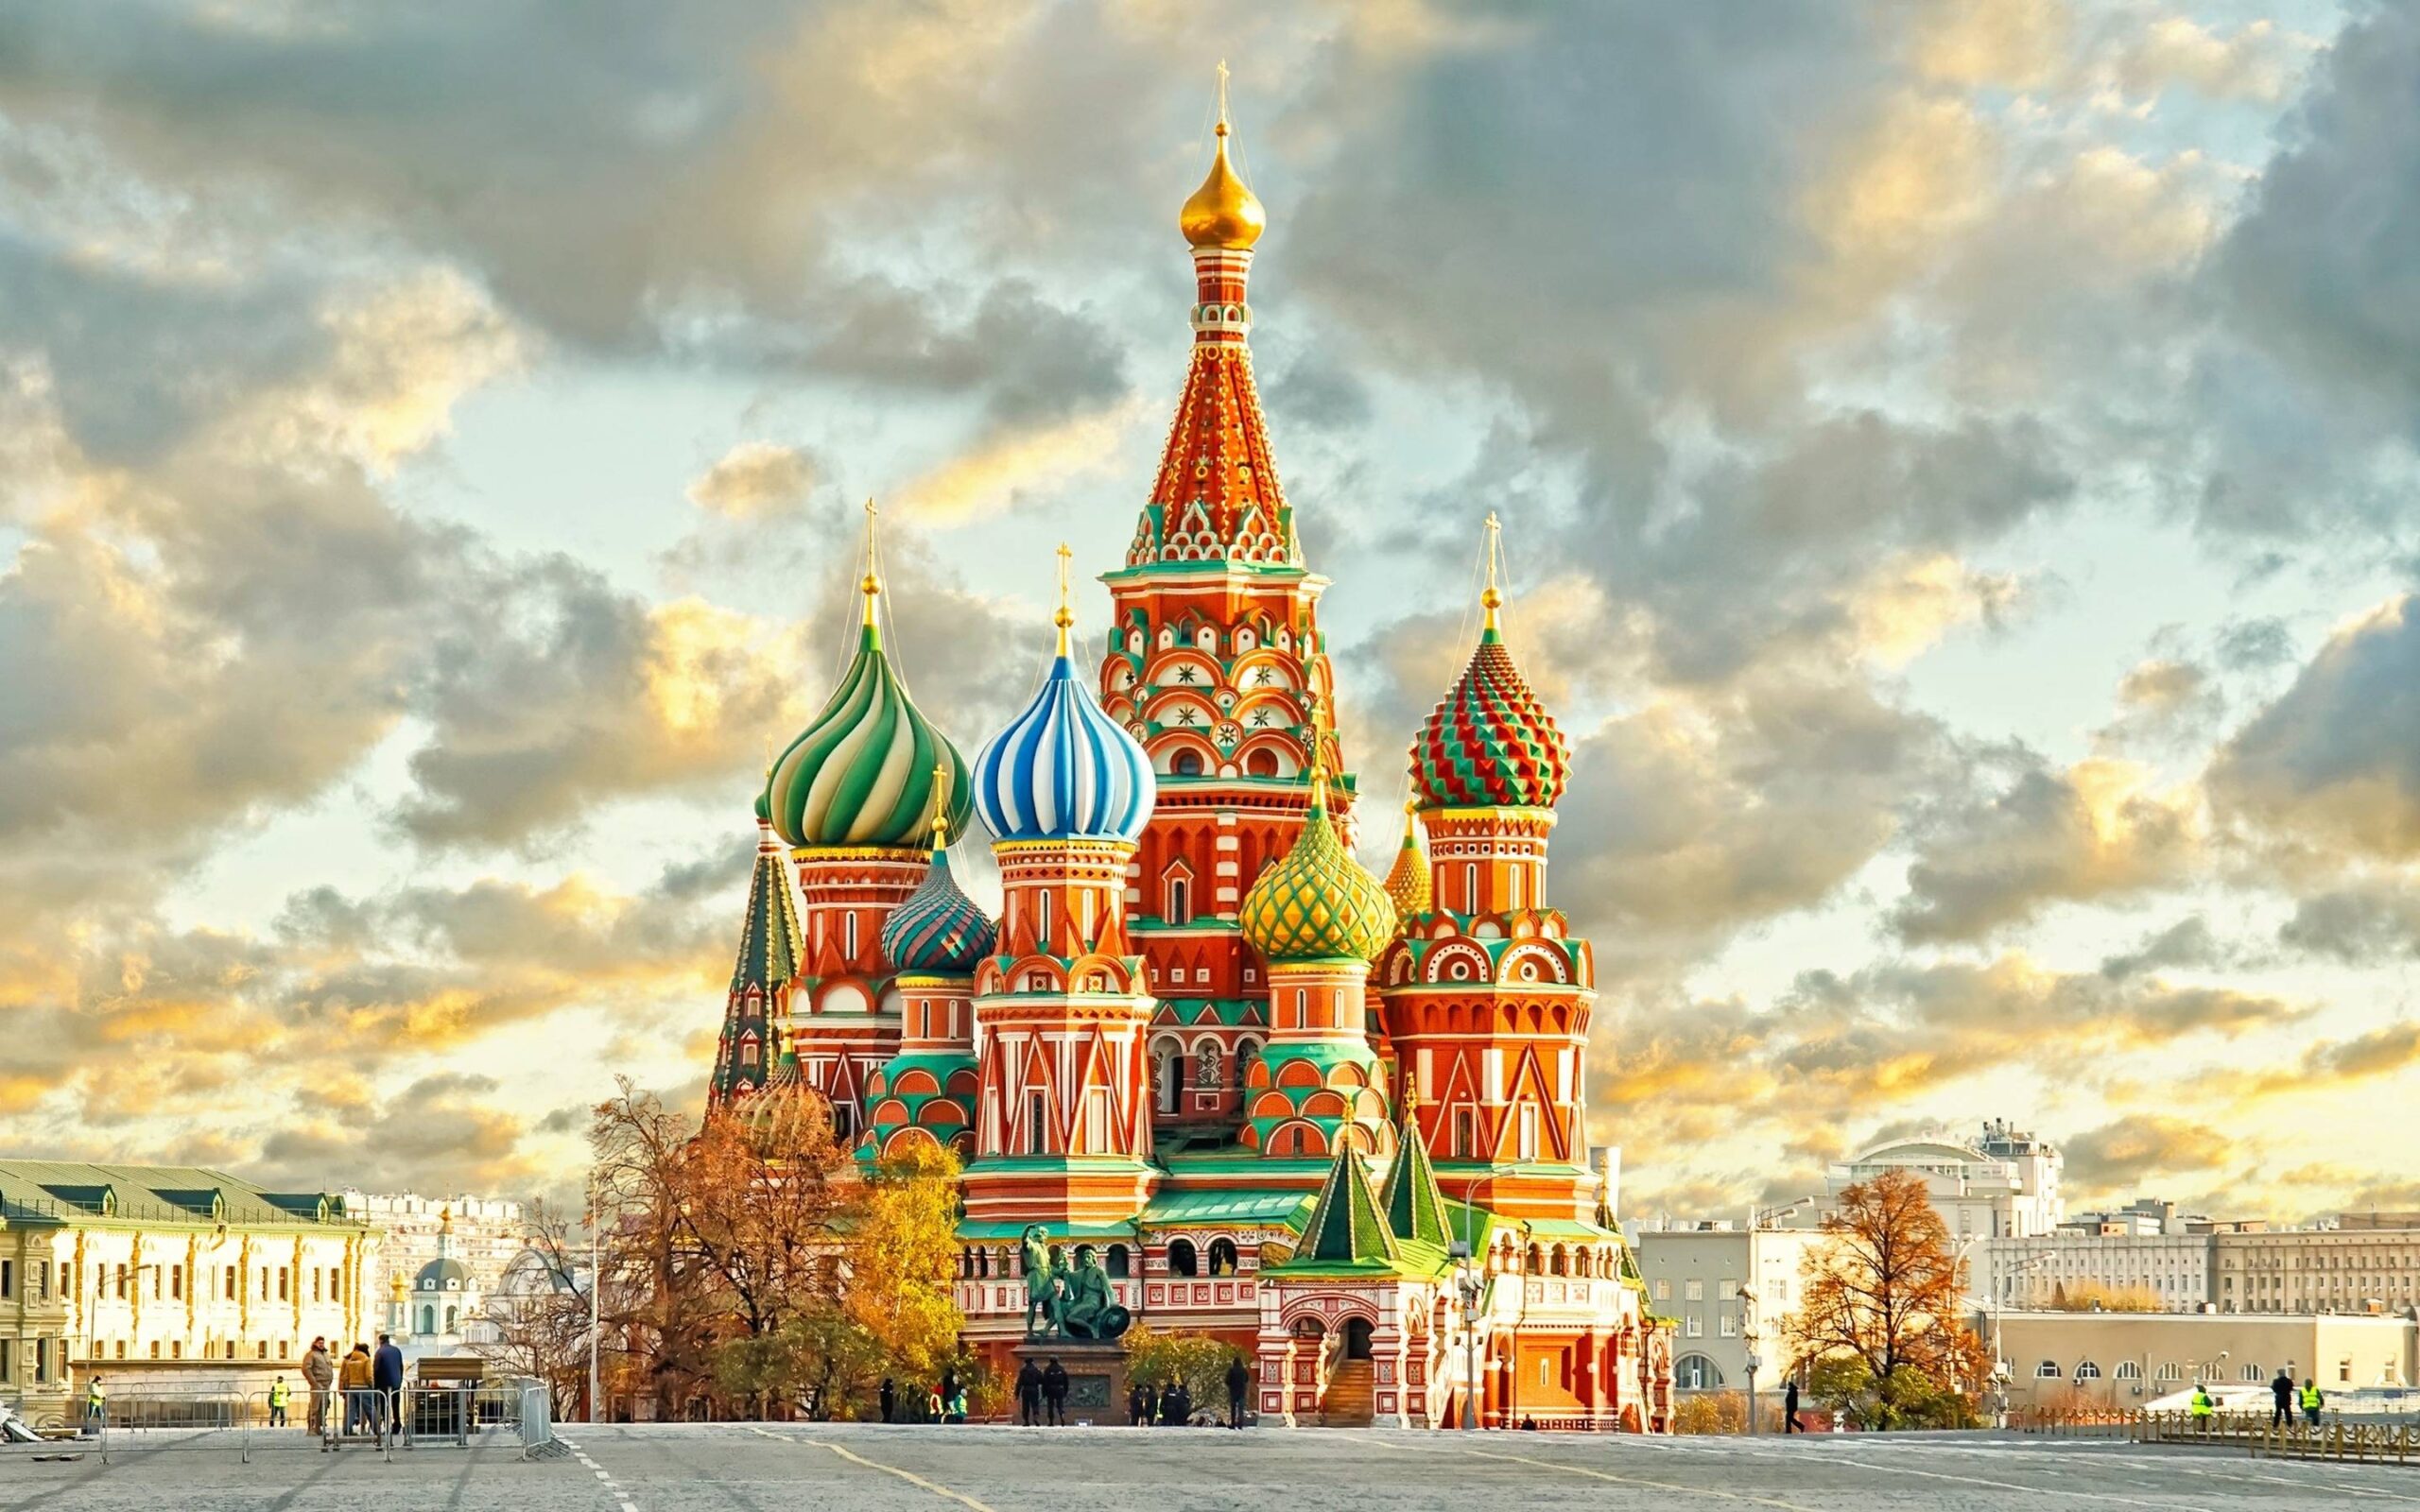 Saint Basil&Cathedral Moscow wallpapers 2K backgrounds download